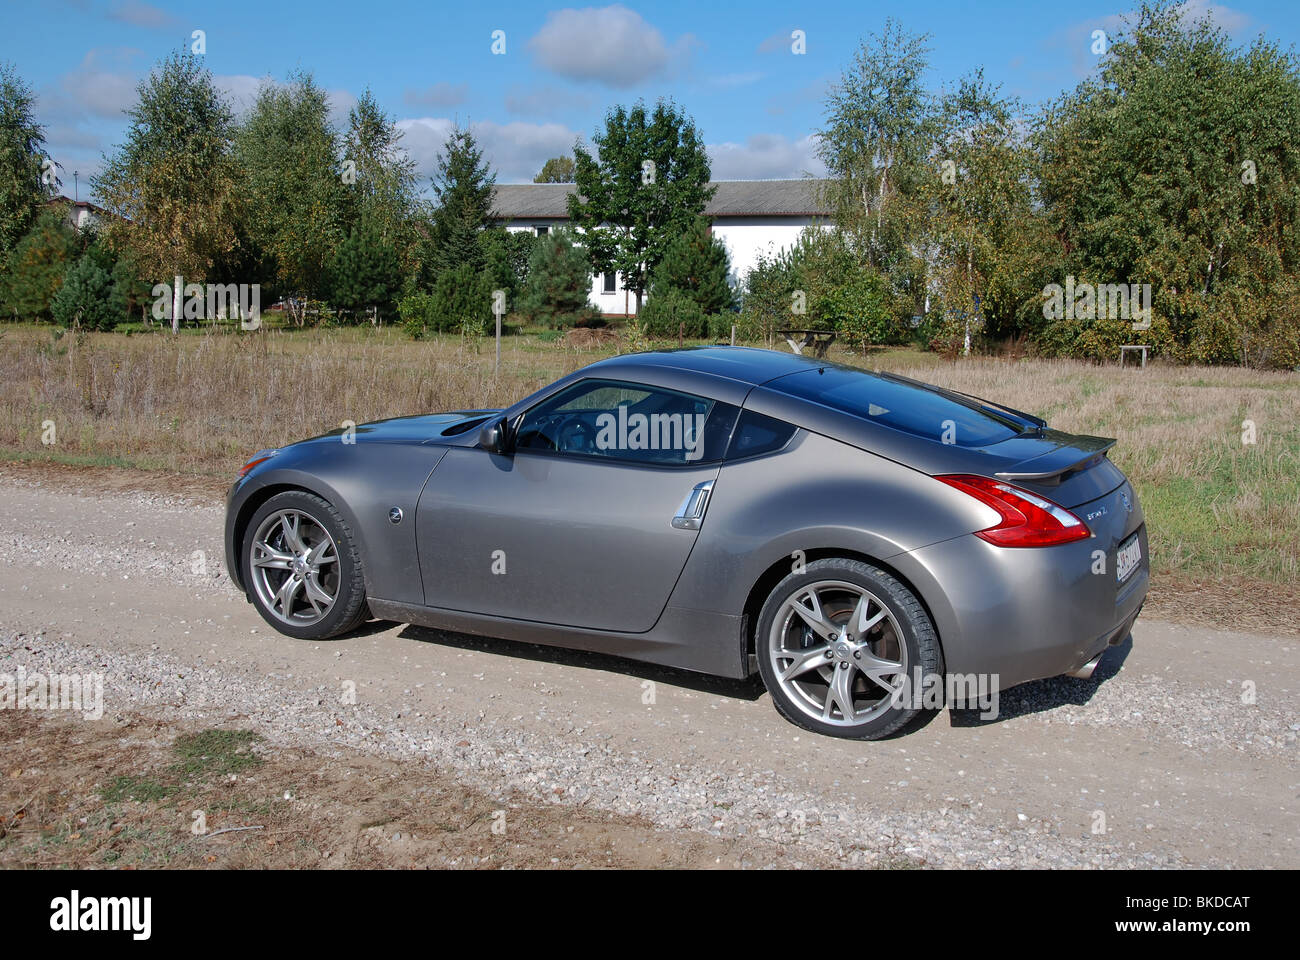 Nissan 370Z - 2009 - gray metallic - two doors (2D) - Japan popular sports coupe - on gravel road Stock Photo